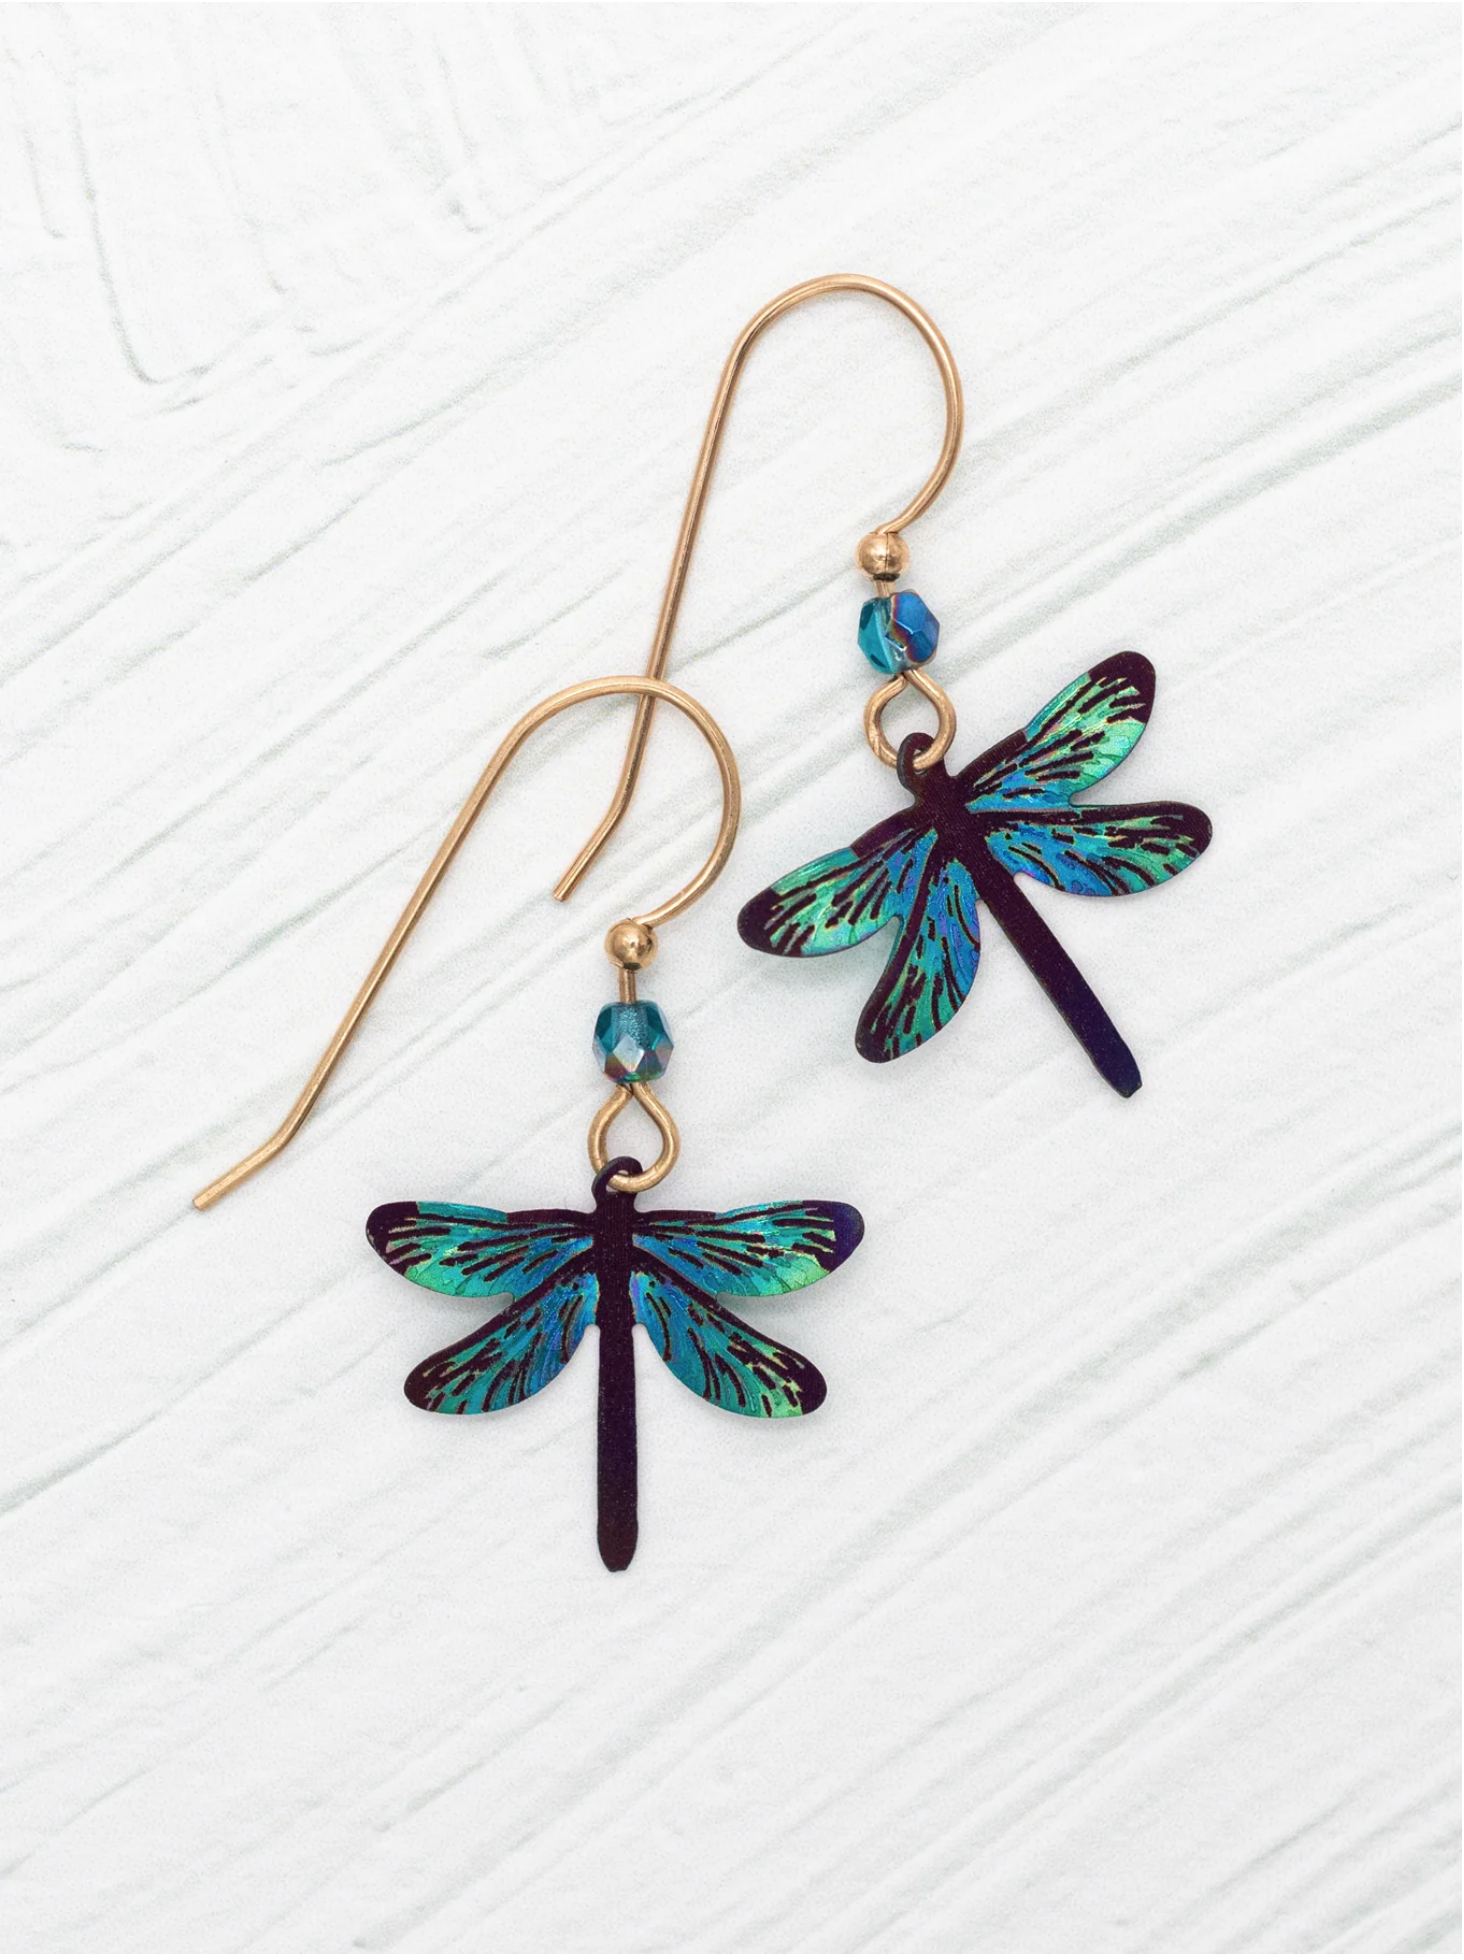 Dragonfly Dreams Earrings in Turquoise Blue - Heart of the Home LV